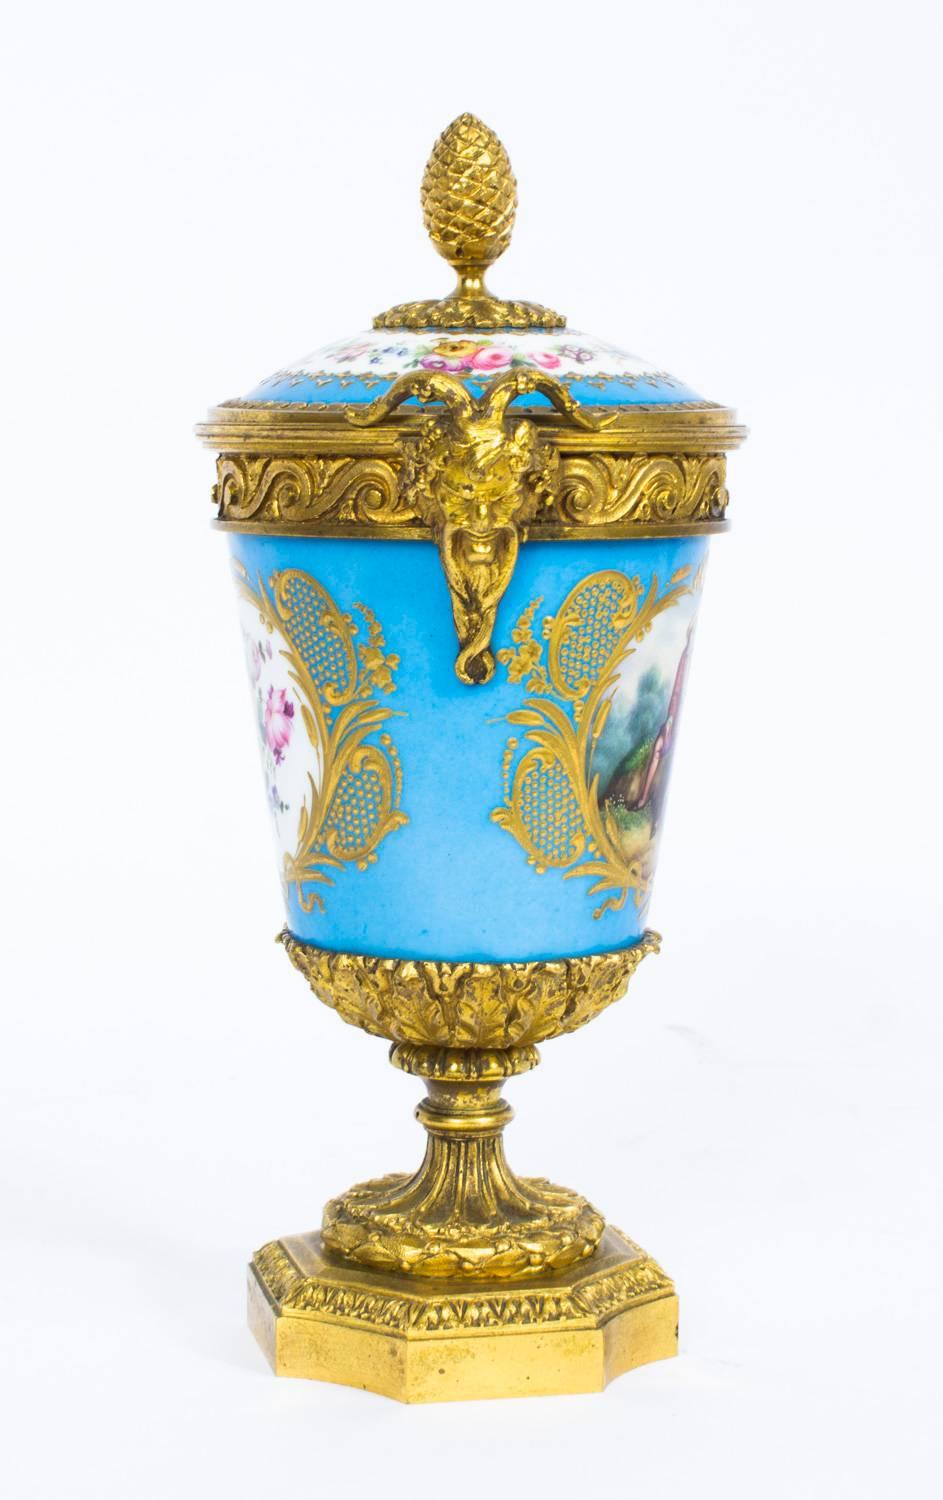 Mid-19th Century 19th Century Pair of French Ormolu-Mounted Sèvres Lidded Urns Vases